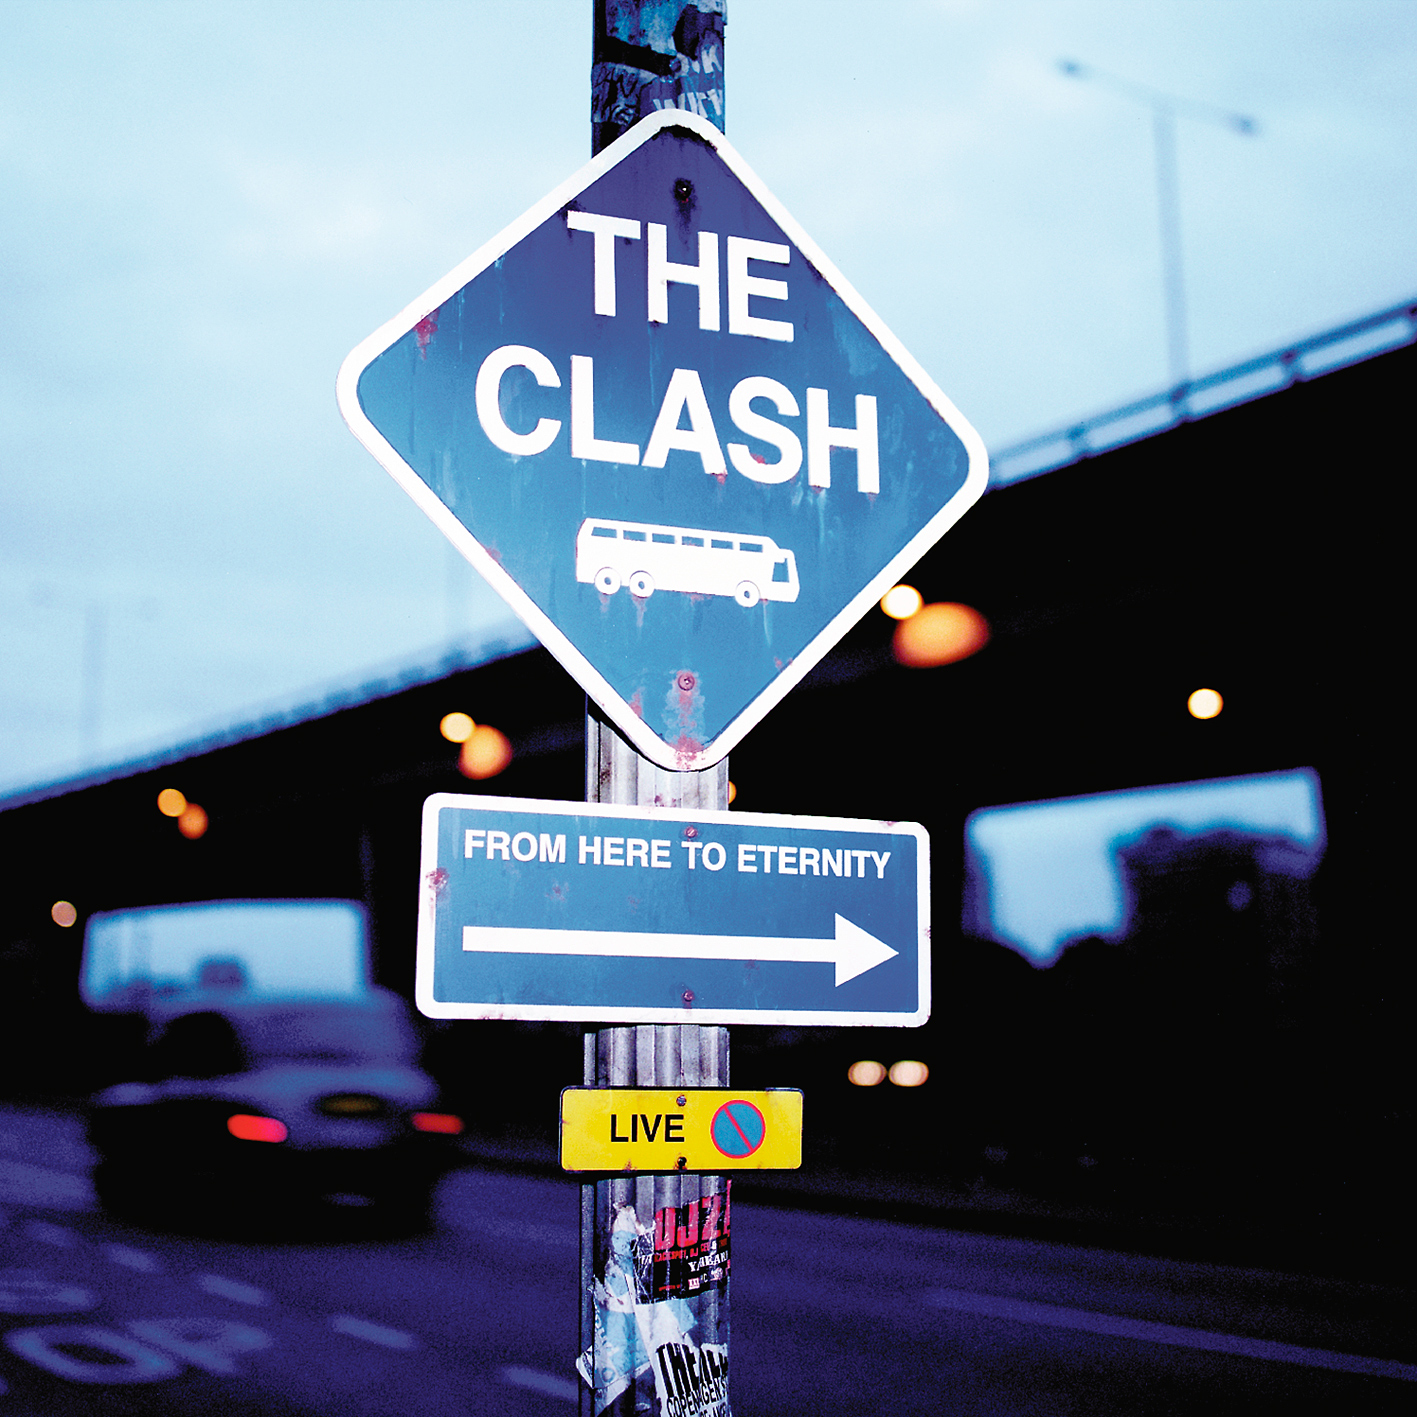 The Clash - From Here To Eternity: Live (1999/2013) [HDTracks FLAC 24bit/96kHz]